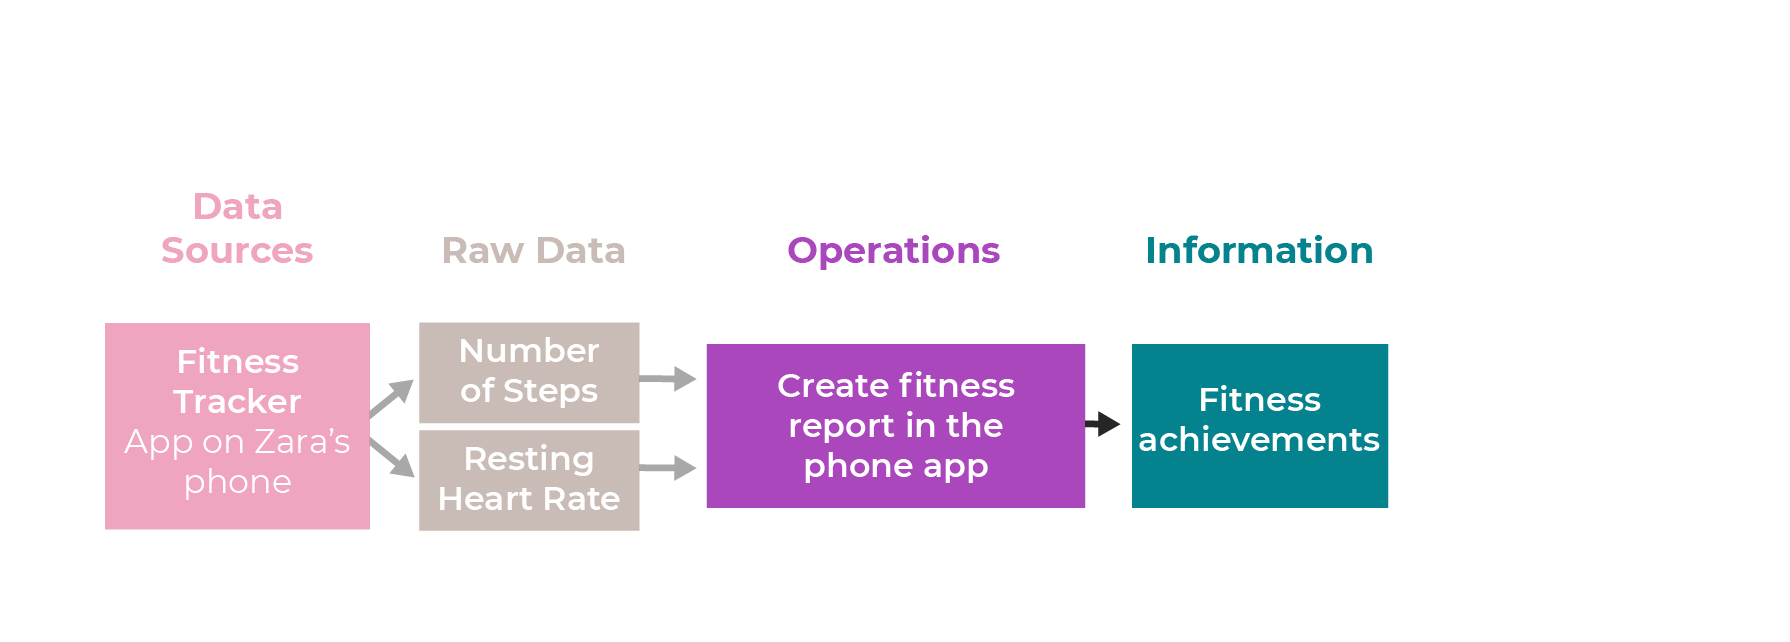 A picture shows the continuation of the previous data pipeline for Zara’s fitness tracker data. The operation for both raw data is creating a fitness report in the phone app. The resulting information is fitness achievements.